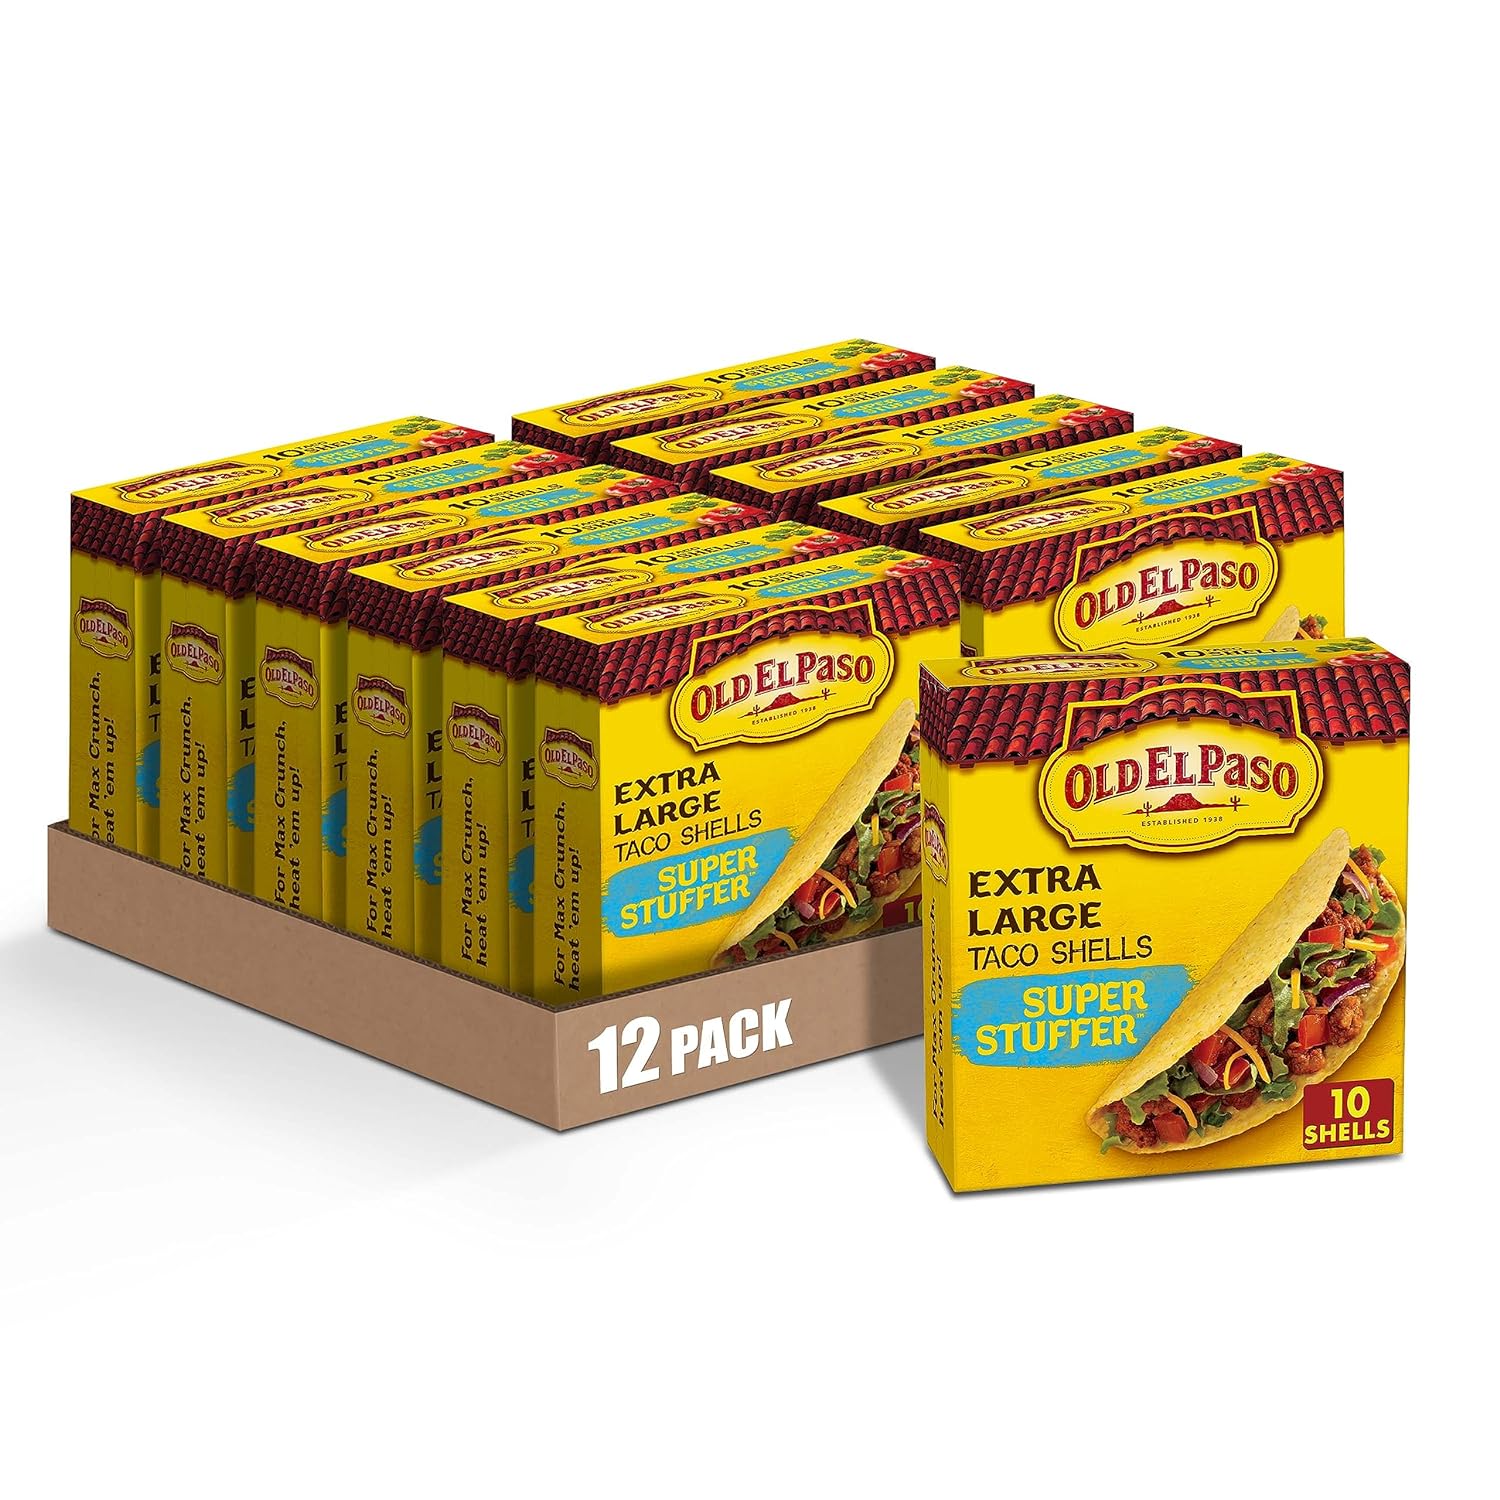 Old El Paso Extra Large Super Stuffer Taco Shells, 10 ct., 6.6 oz. (Pack of 12)